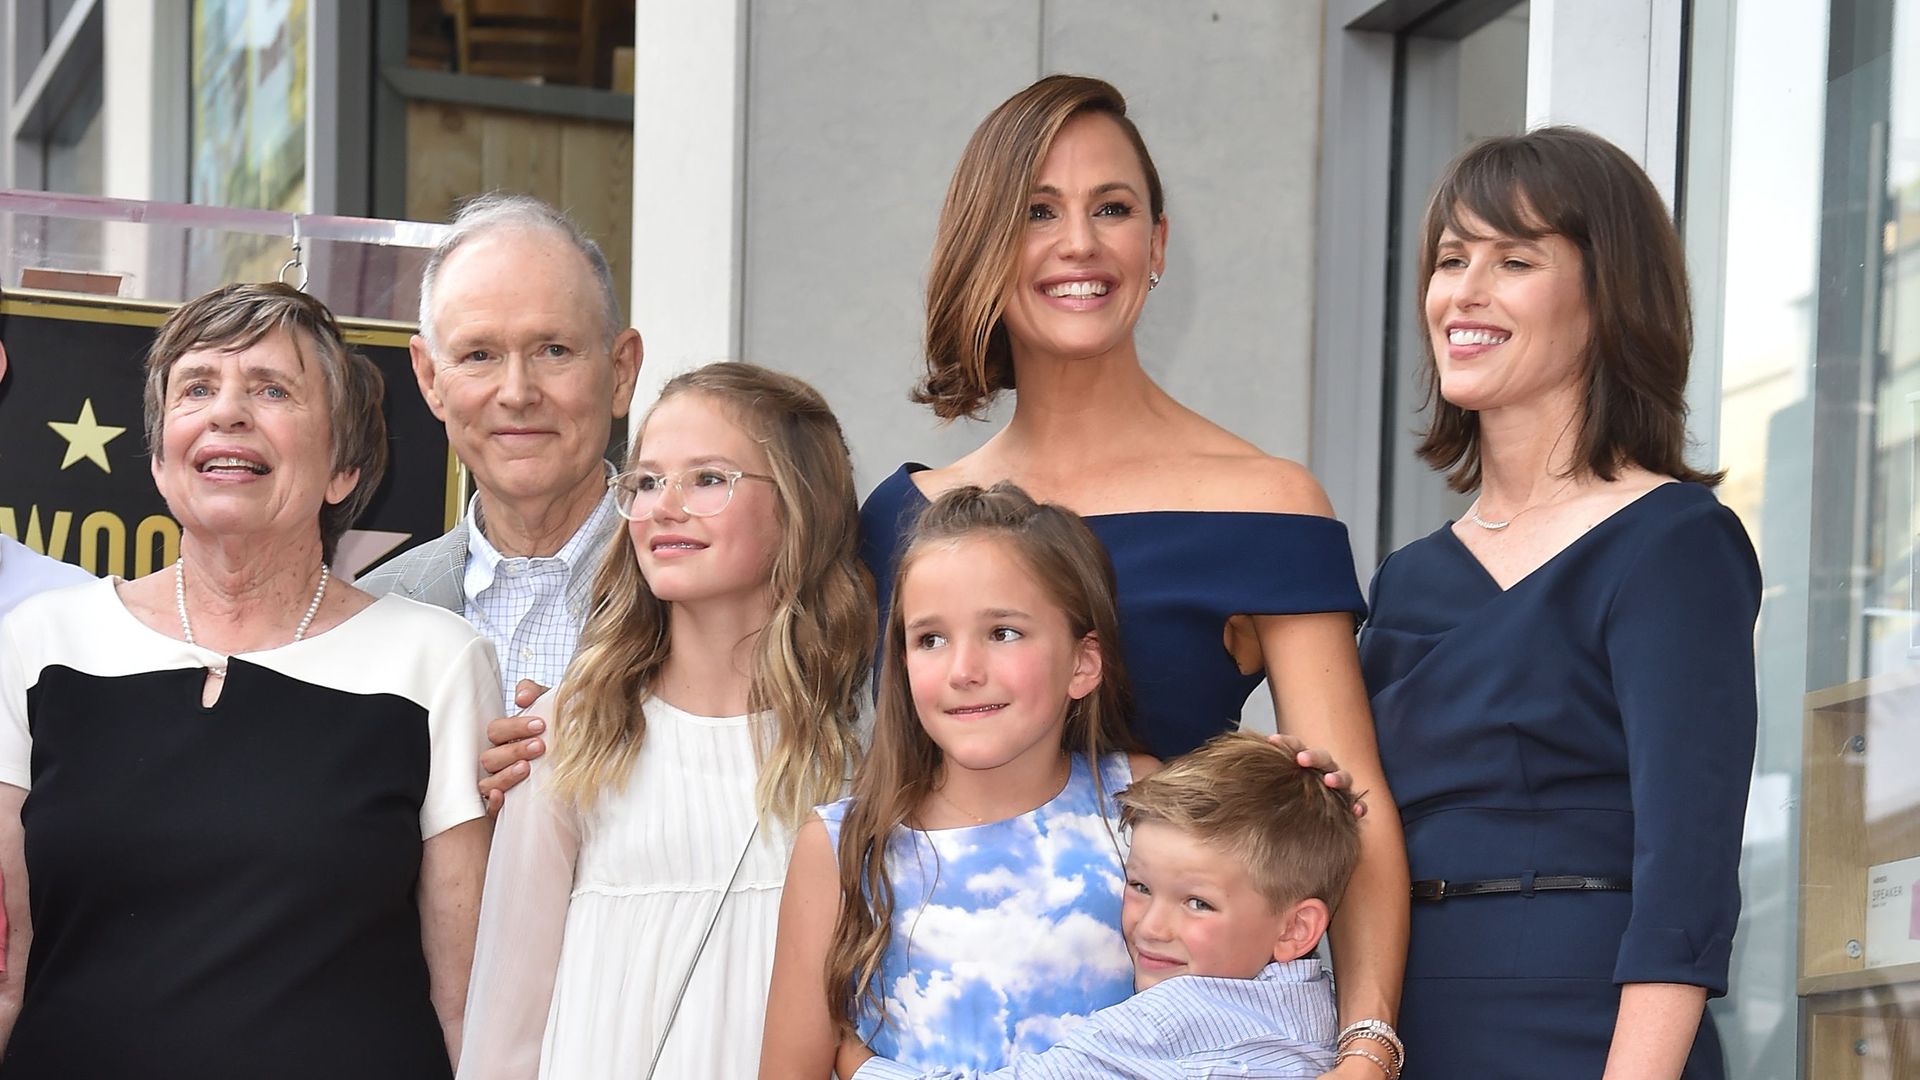 Jennifer Garner poses with members of her family at her star on the Hollywood Walk of Fame, August 20, 2018 in Hollywood, California.  From left are parents Patricia Ann Garner and William John Garner, her children Violet Affleck, Seraphina Rose Elizabeth